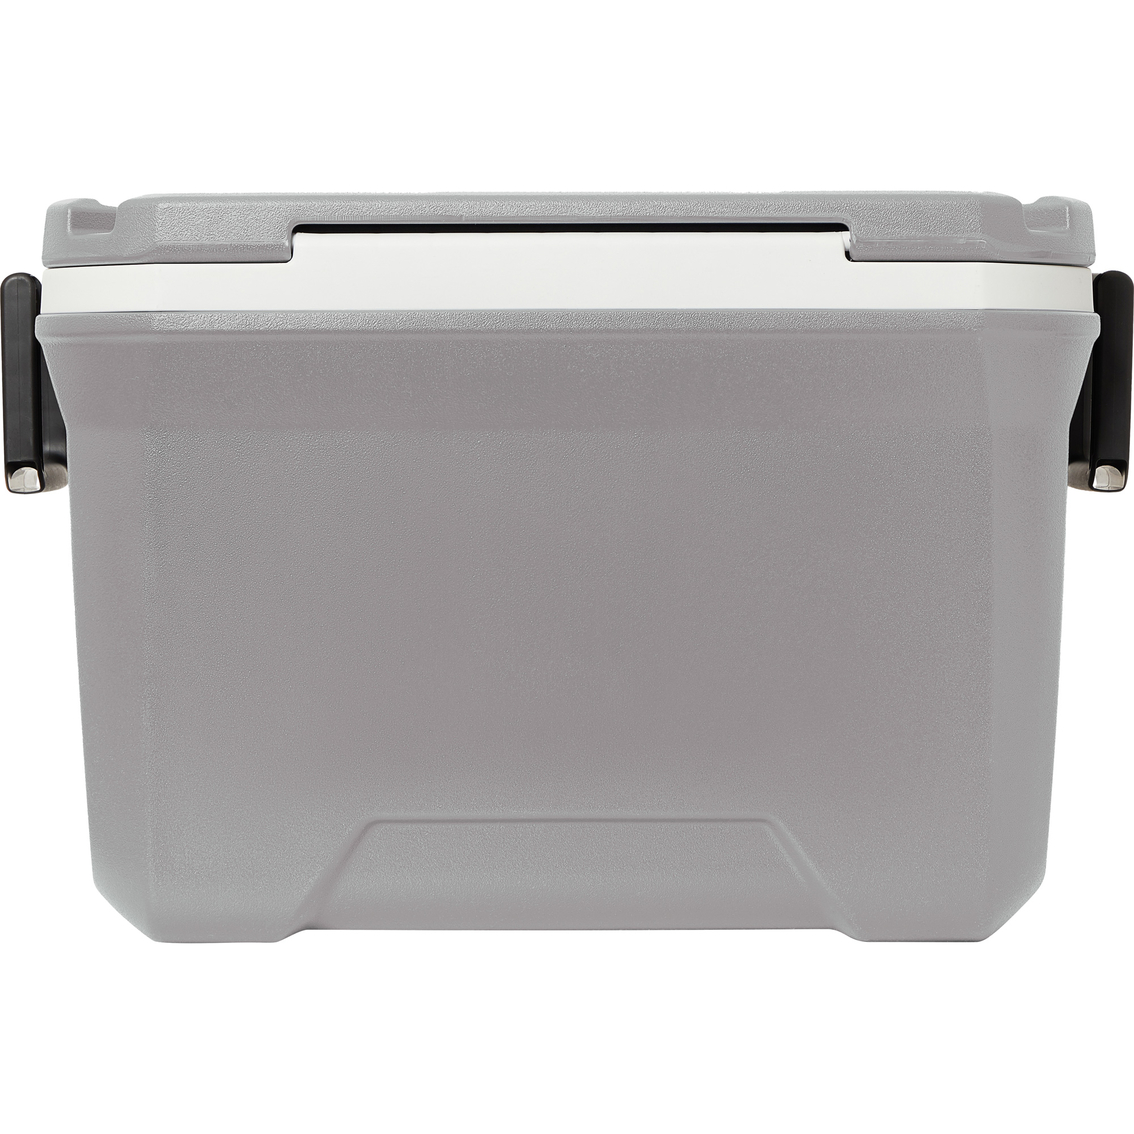 Coleman® 52 qt. Hard Ice Chest Cooler - Image 2 of 8